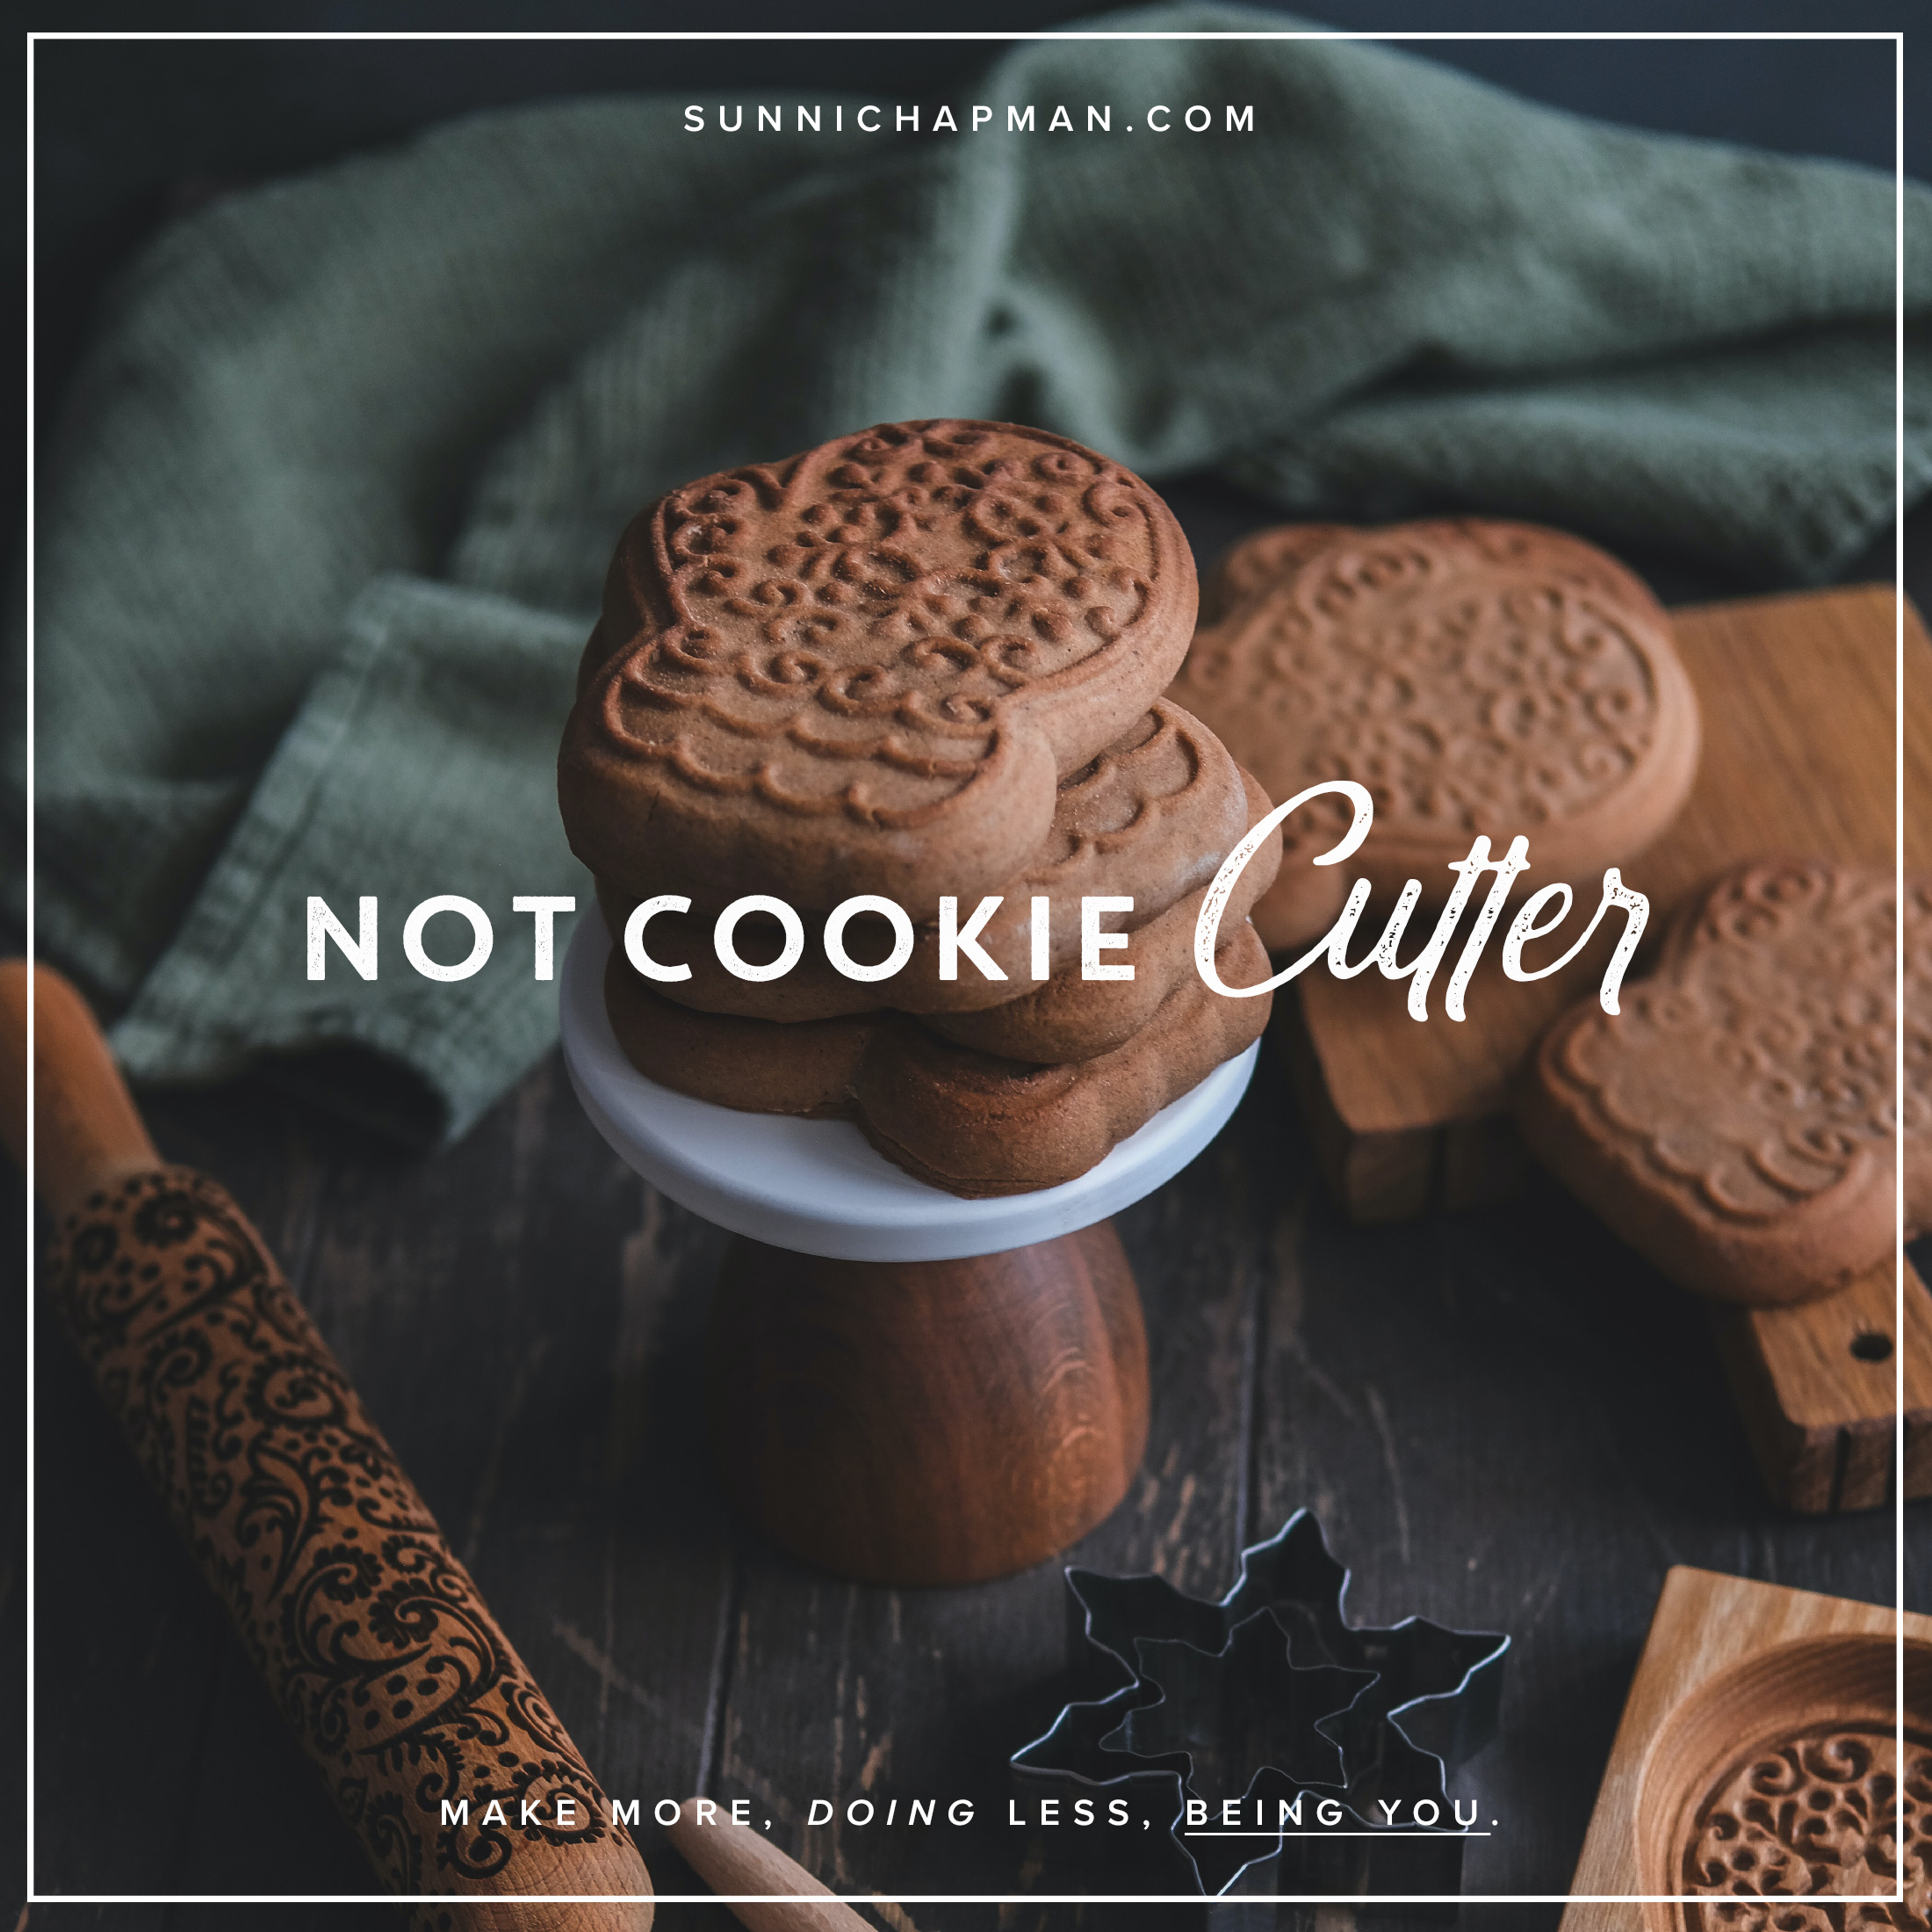 Promotional graphic for SunniChapman.com featuring a stack of ornate cookies with embossed designs on a cake stand, next to a carved rolling pin and cookie cutters on a wooden surface. The text 'Not Cookie Cutter' is prominently displayed with the tagline 'Make more, doing less, being you.' A green cloth adds a contrasting background